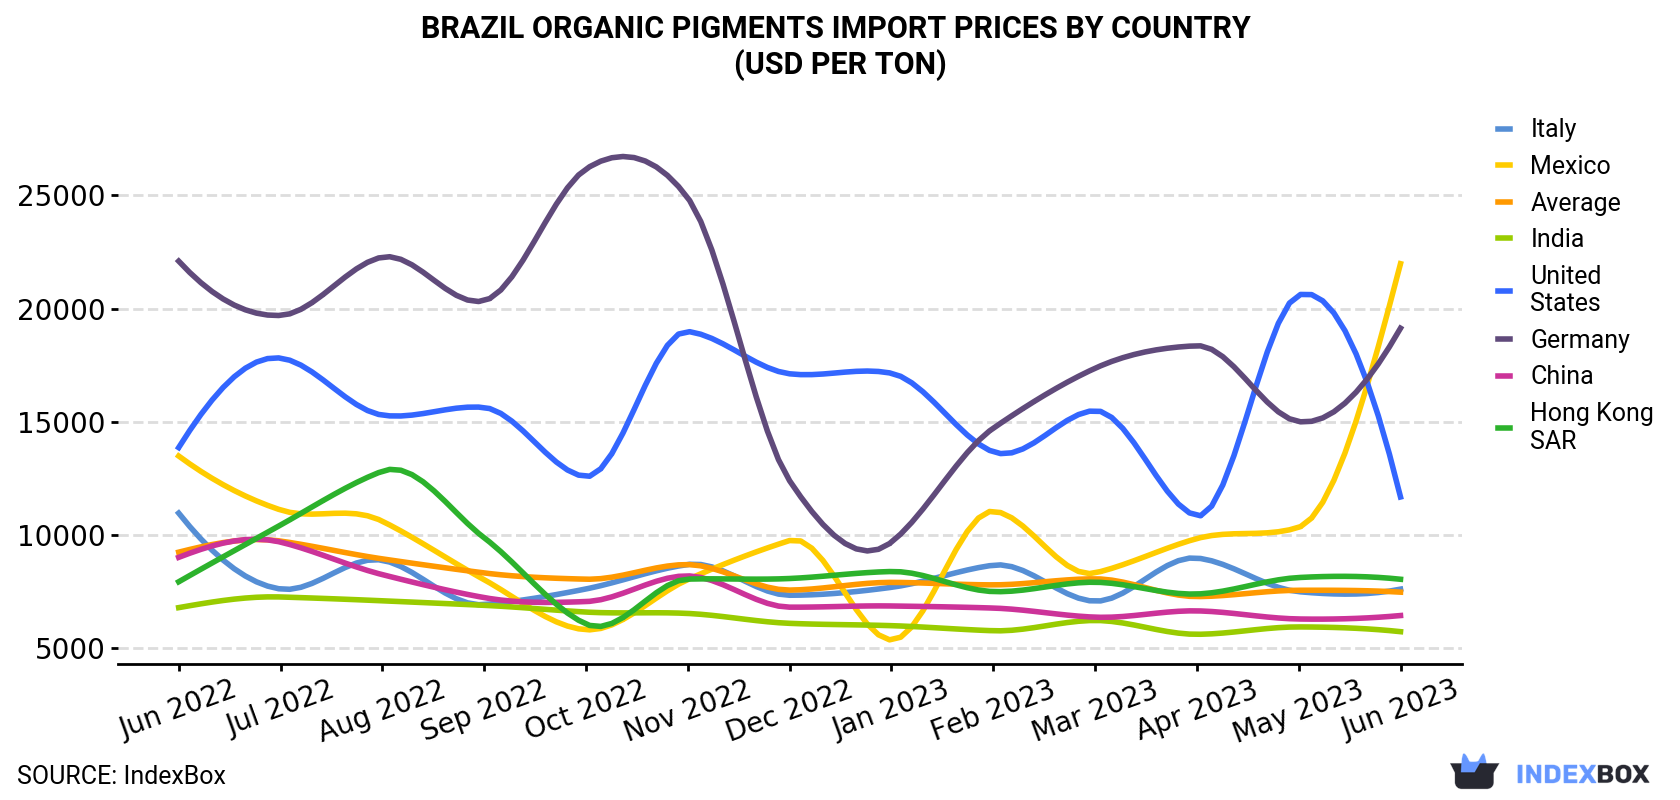 Brazil Organic Pigments Import Prices By Country (USD Per Ton)